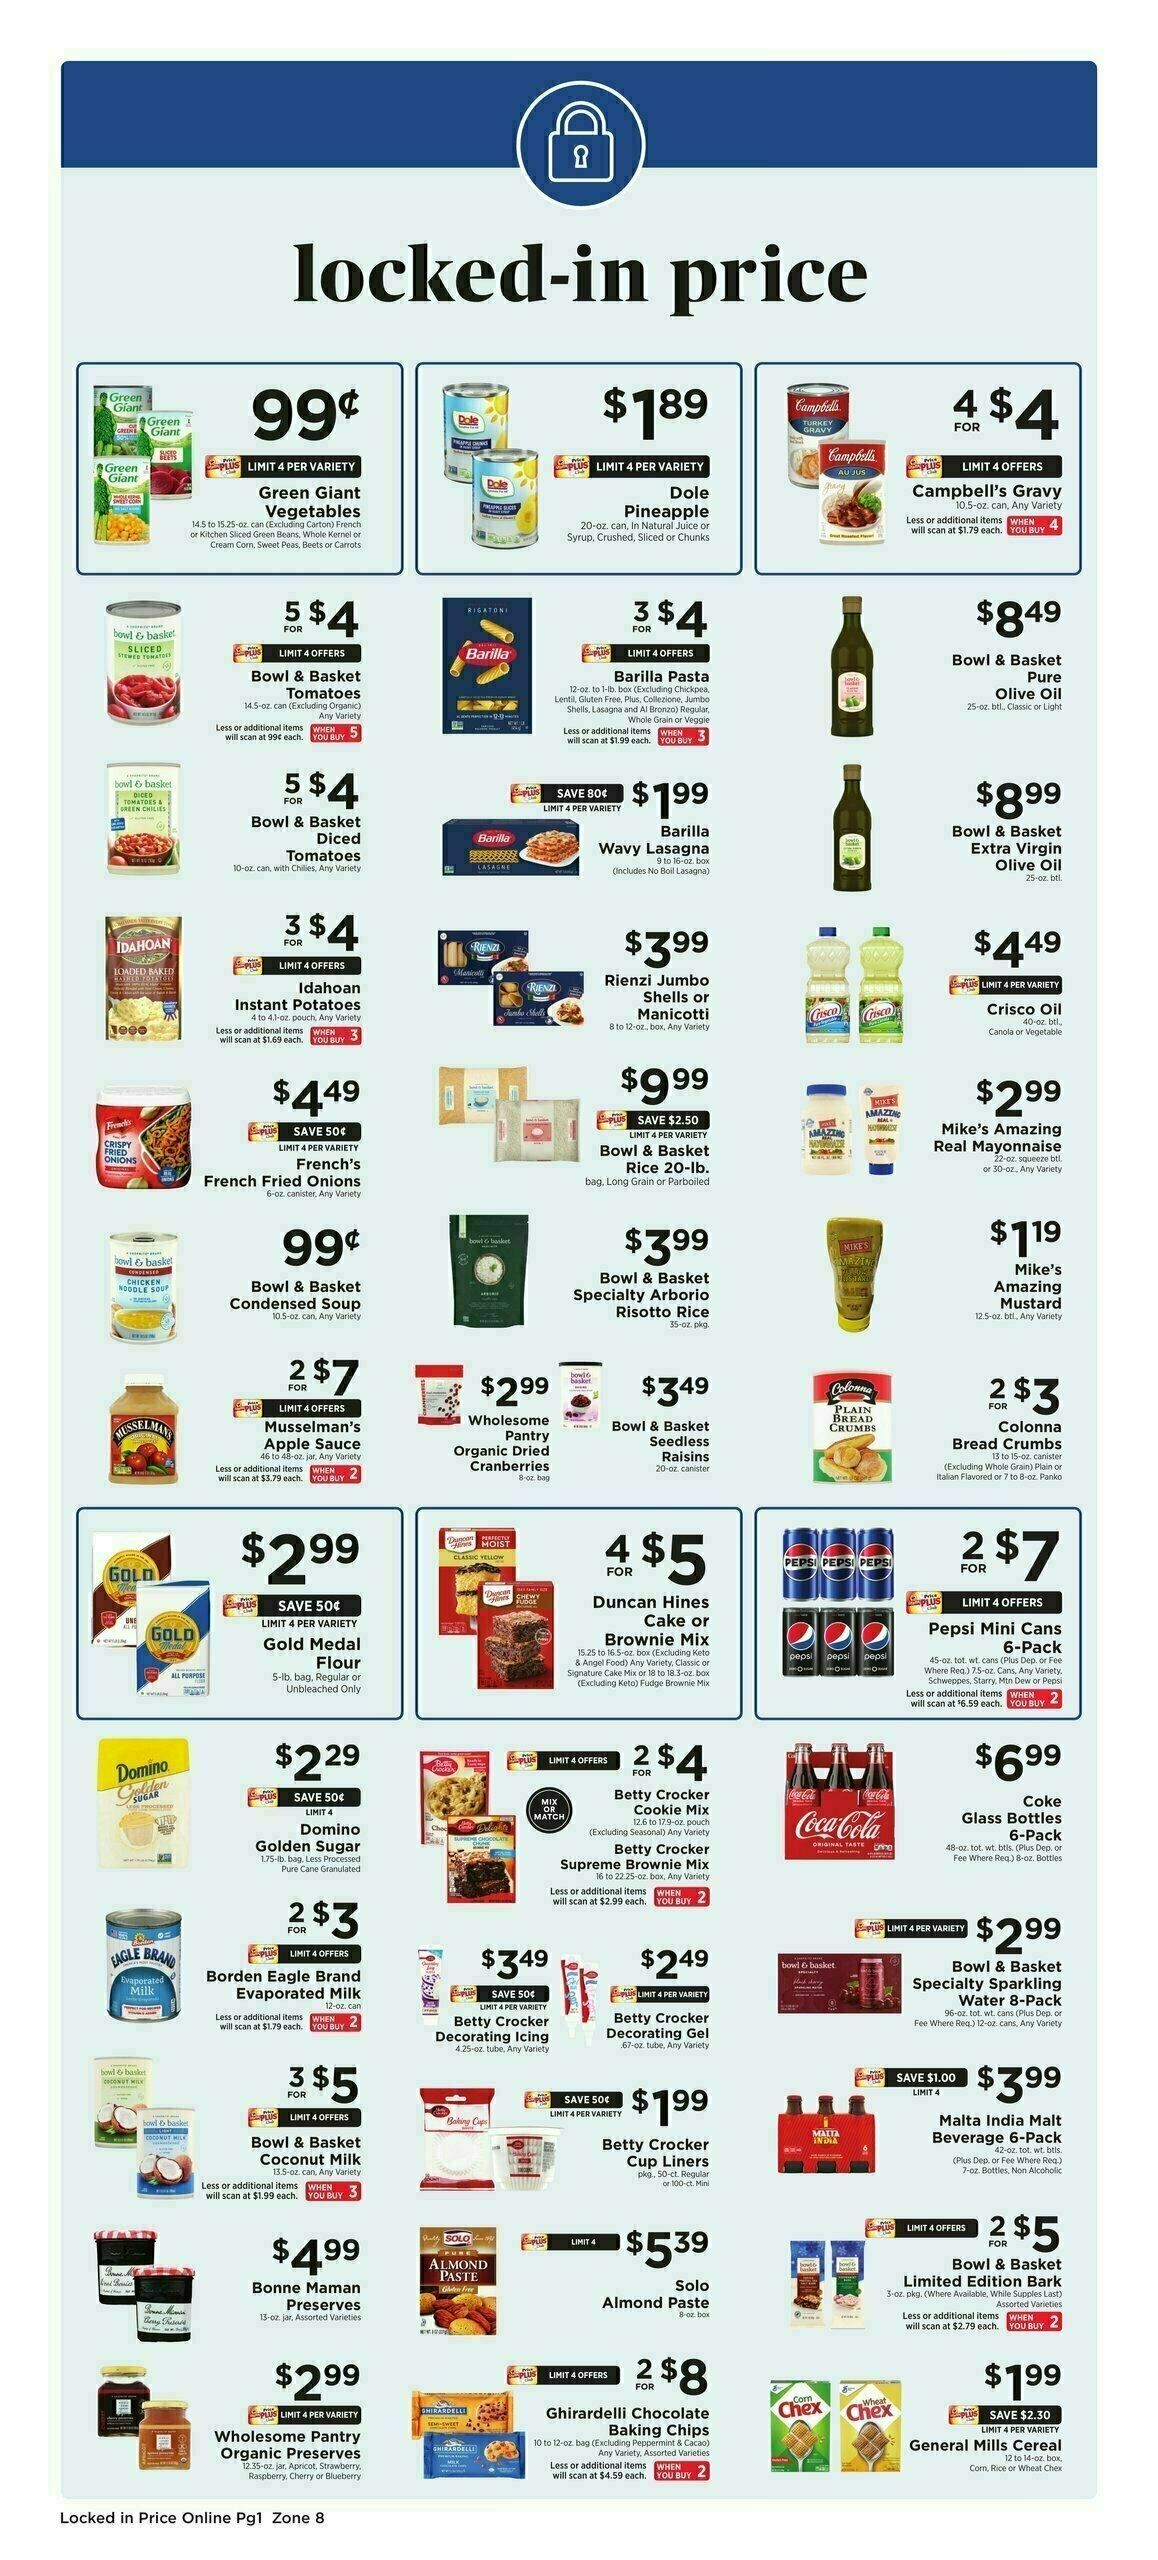 ShopRite Locked-in-Price Weekly Ad from November 24